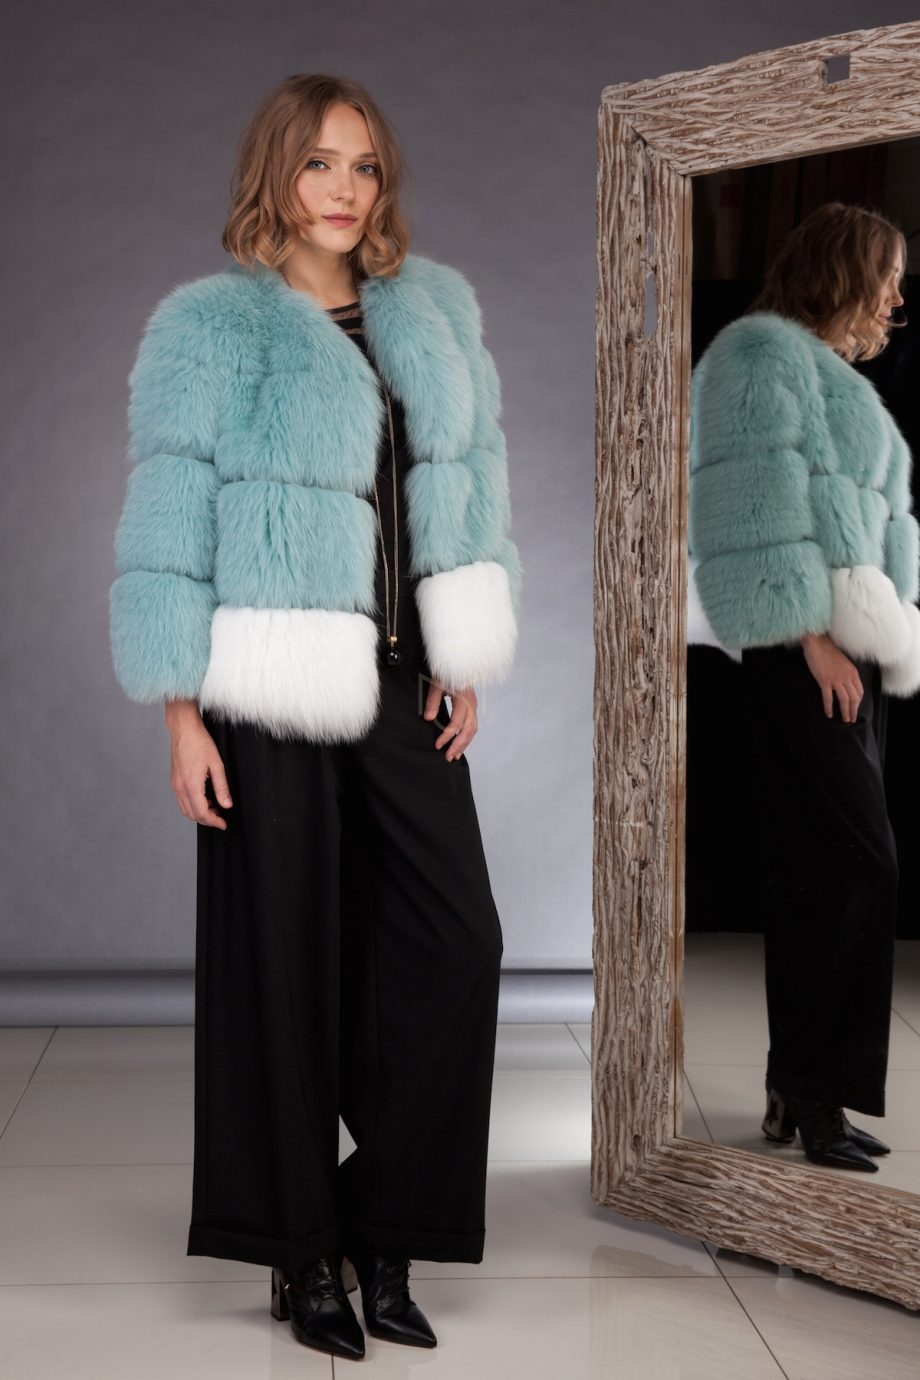 Fox fur jacket, two colors combined made by SILTA MADA fur studio in Vilnius